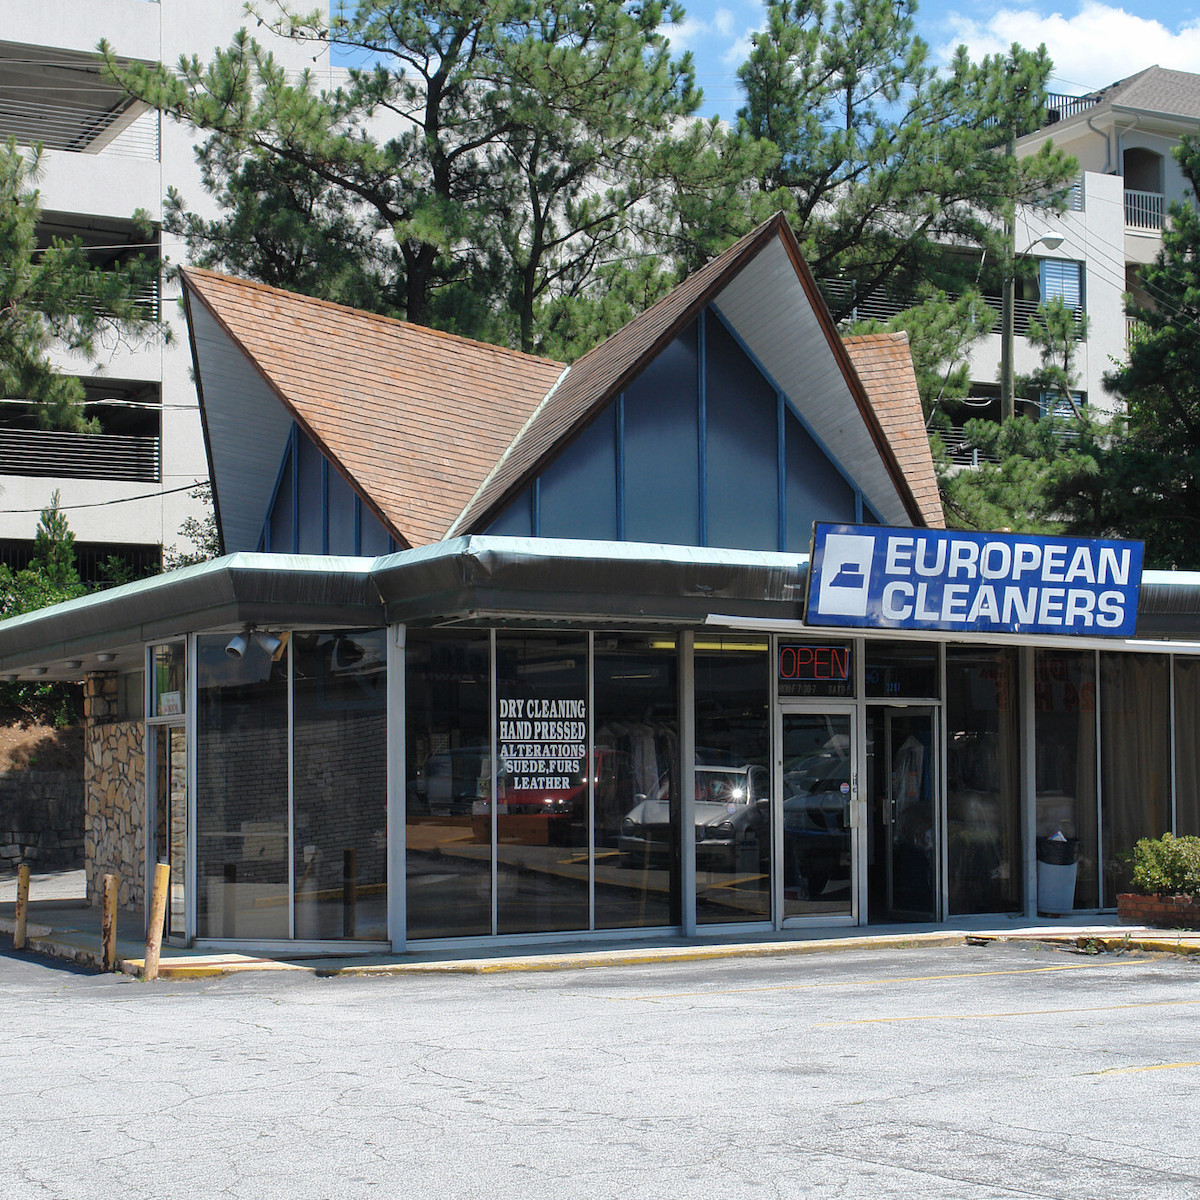 HK Pizzeria to Replace European Dry Cleaning on Cheshire Bridge